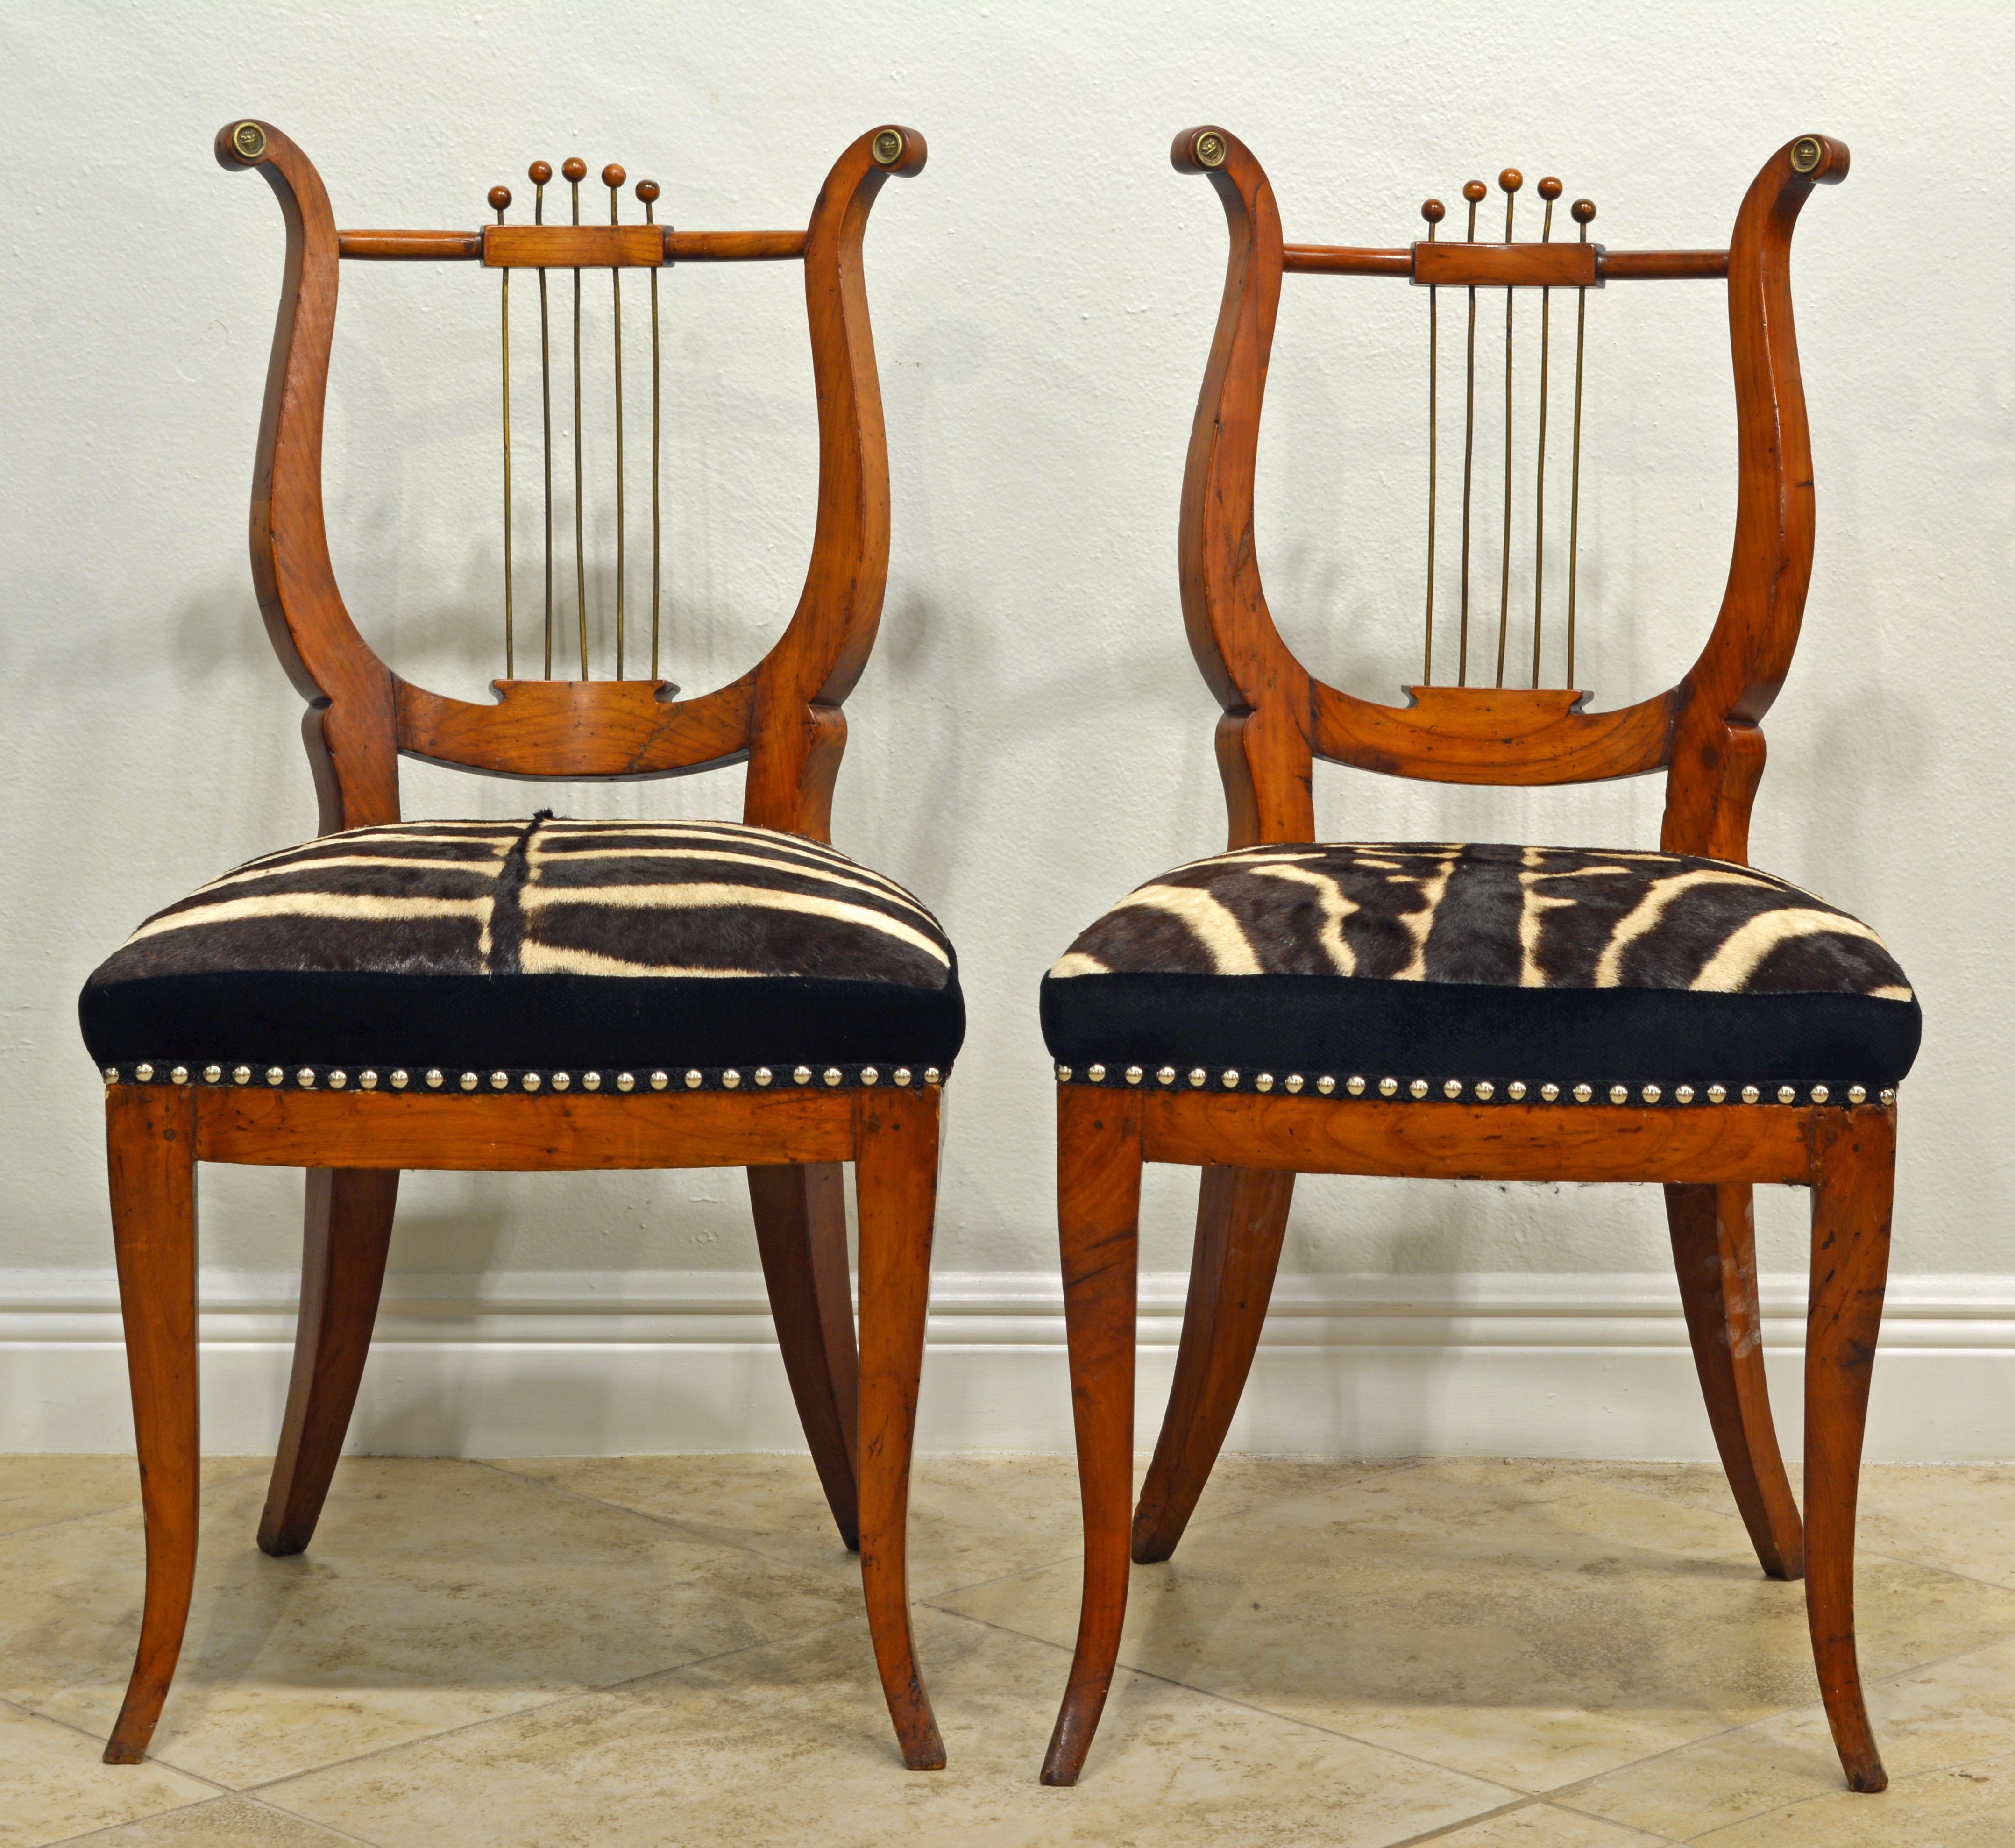 This lovely and unusual pair of Austrian neoclassical musical themed chairs date to the early 1800s and could also be characterized as early Biedermeier style. The backs are very elegant with a combination of a shaped fruit-wood frame incorporating